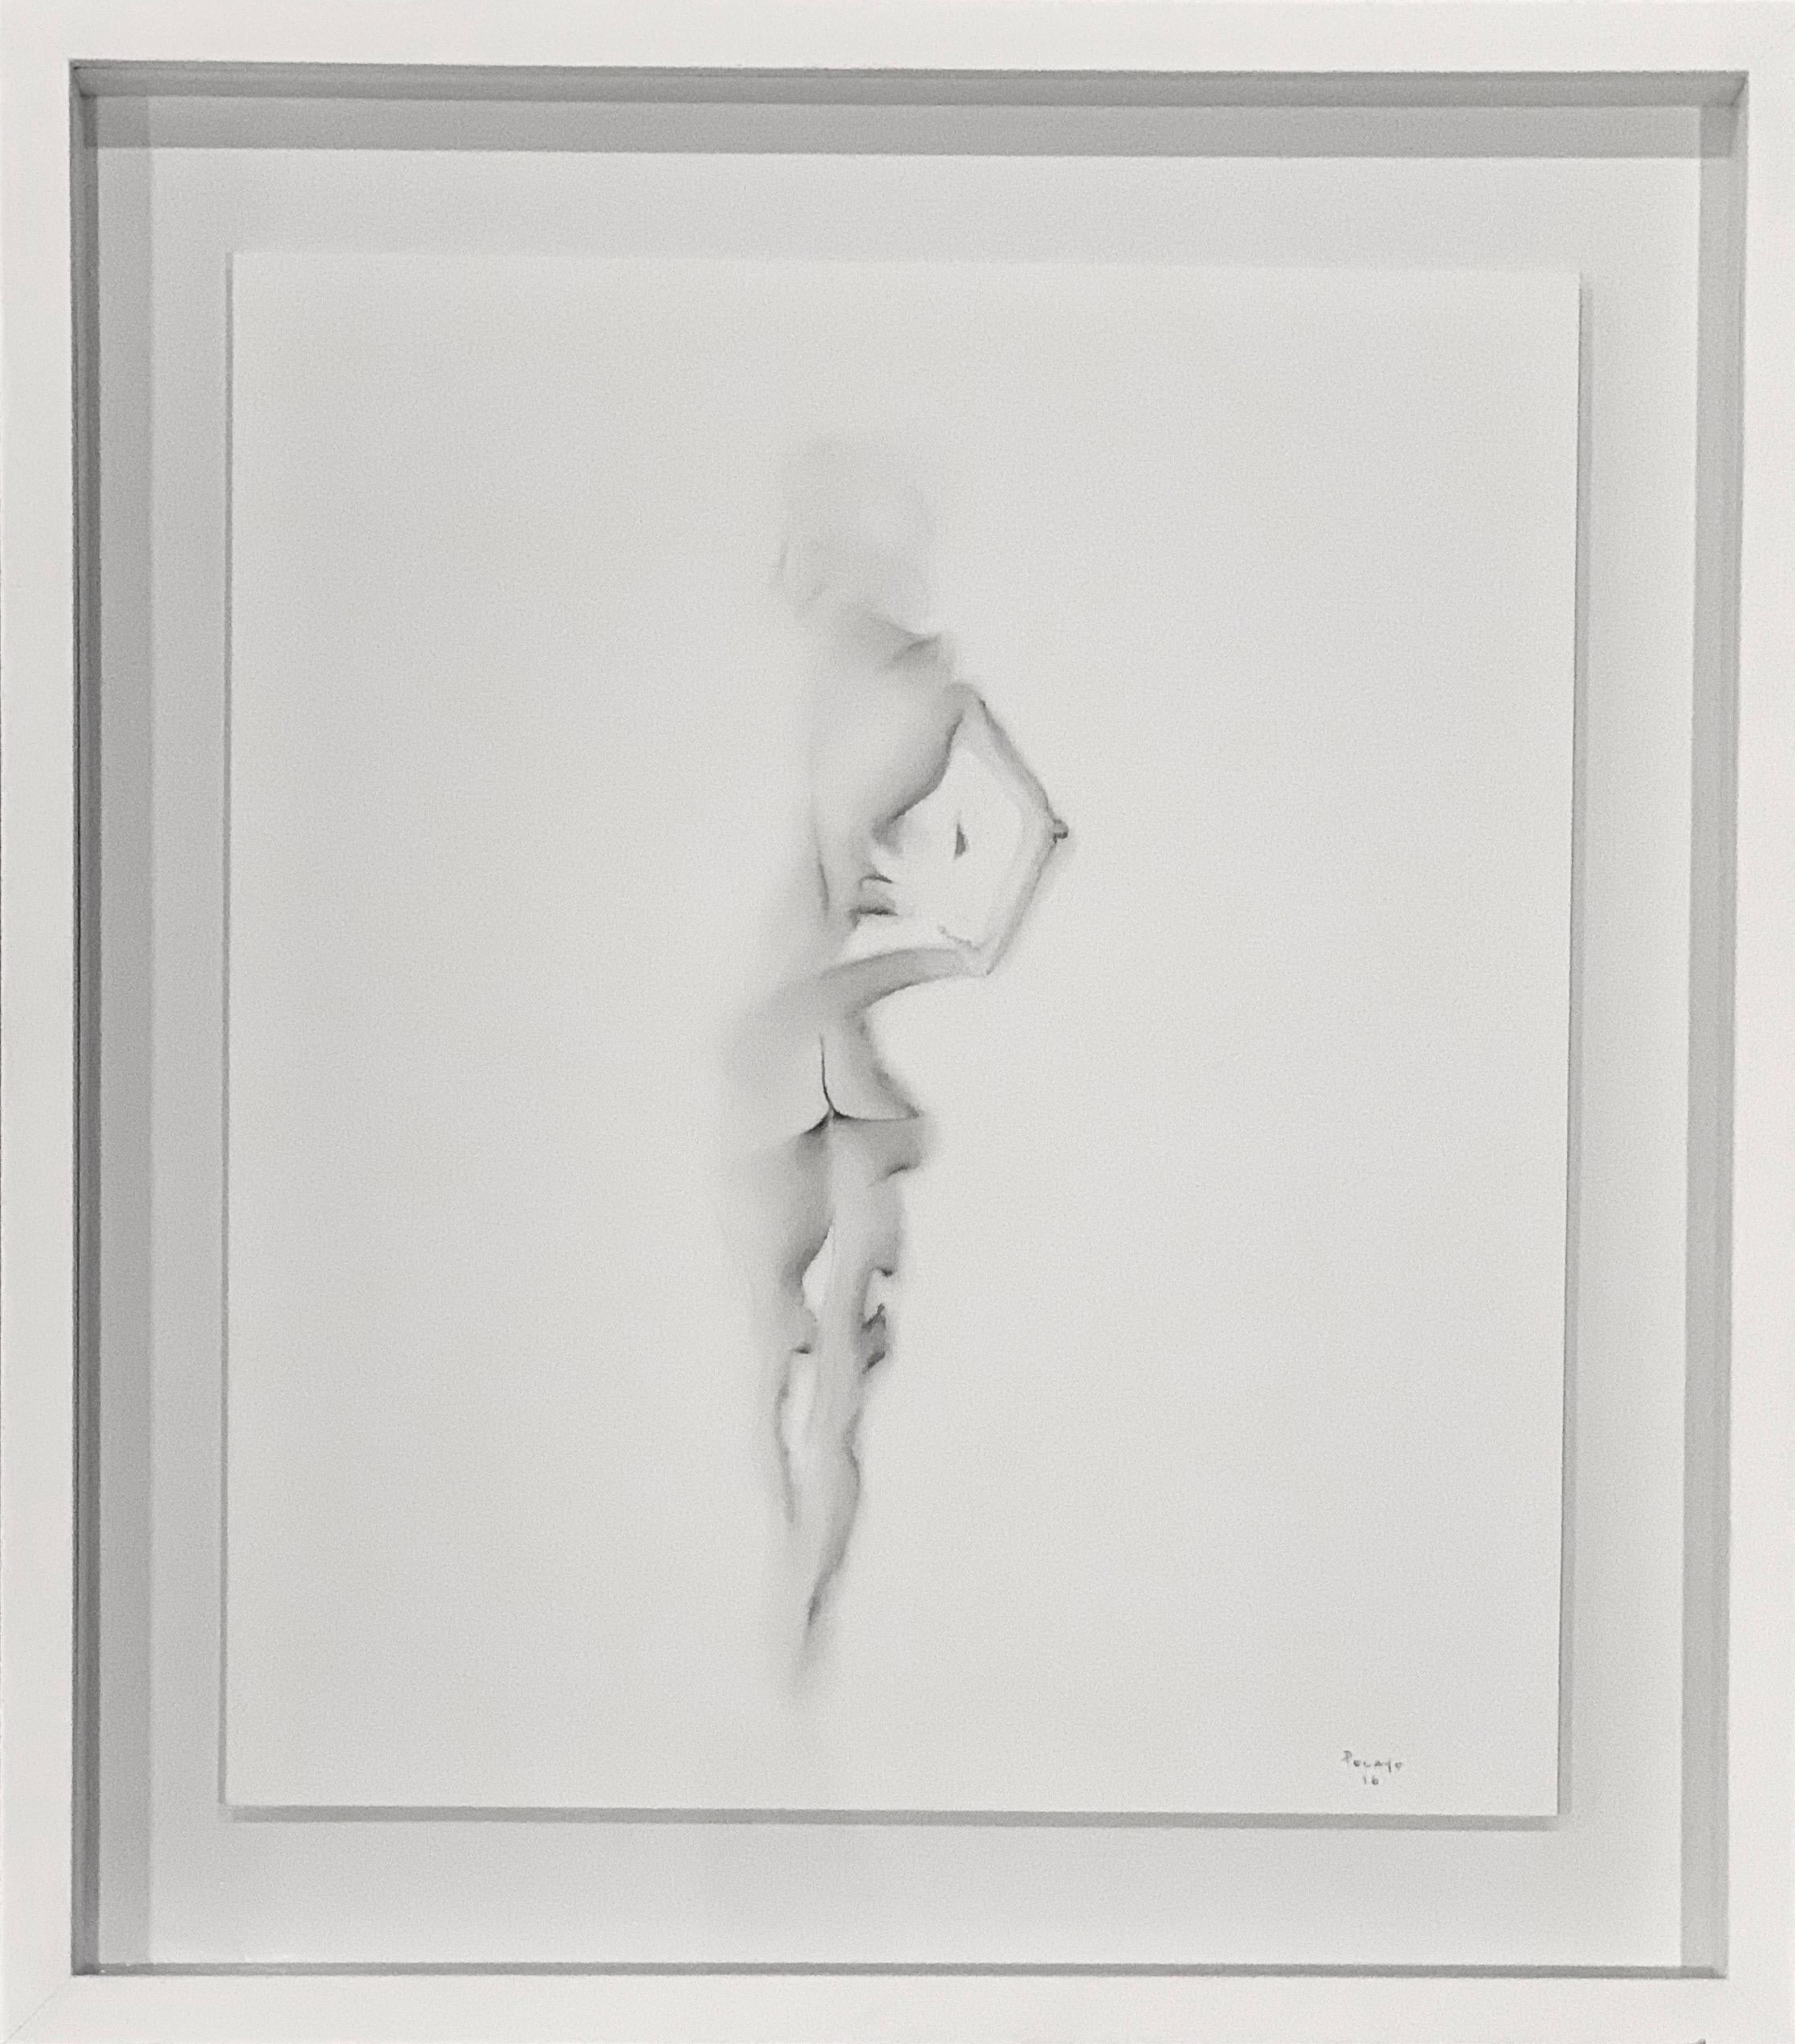 "Untitled 27" (FRAMED) Pencil Drawing 21" x 18" inch by Antonio Pelayo

Medium: Pencil on Paper

Artist Antonio Pelayo, born in Glendale, California, and yet raised for most of his childhood in the Mexican countryside, has never had his own country.